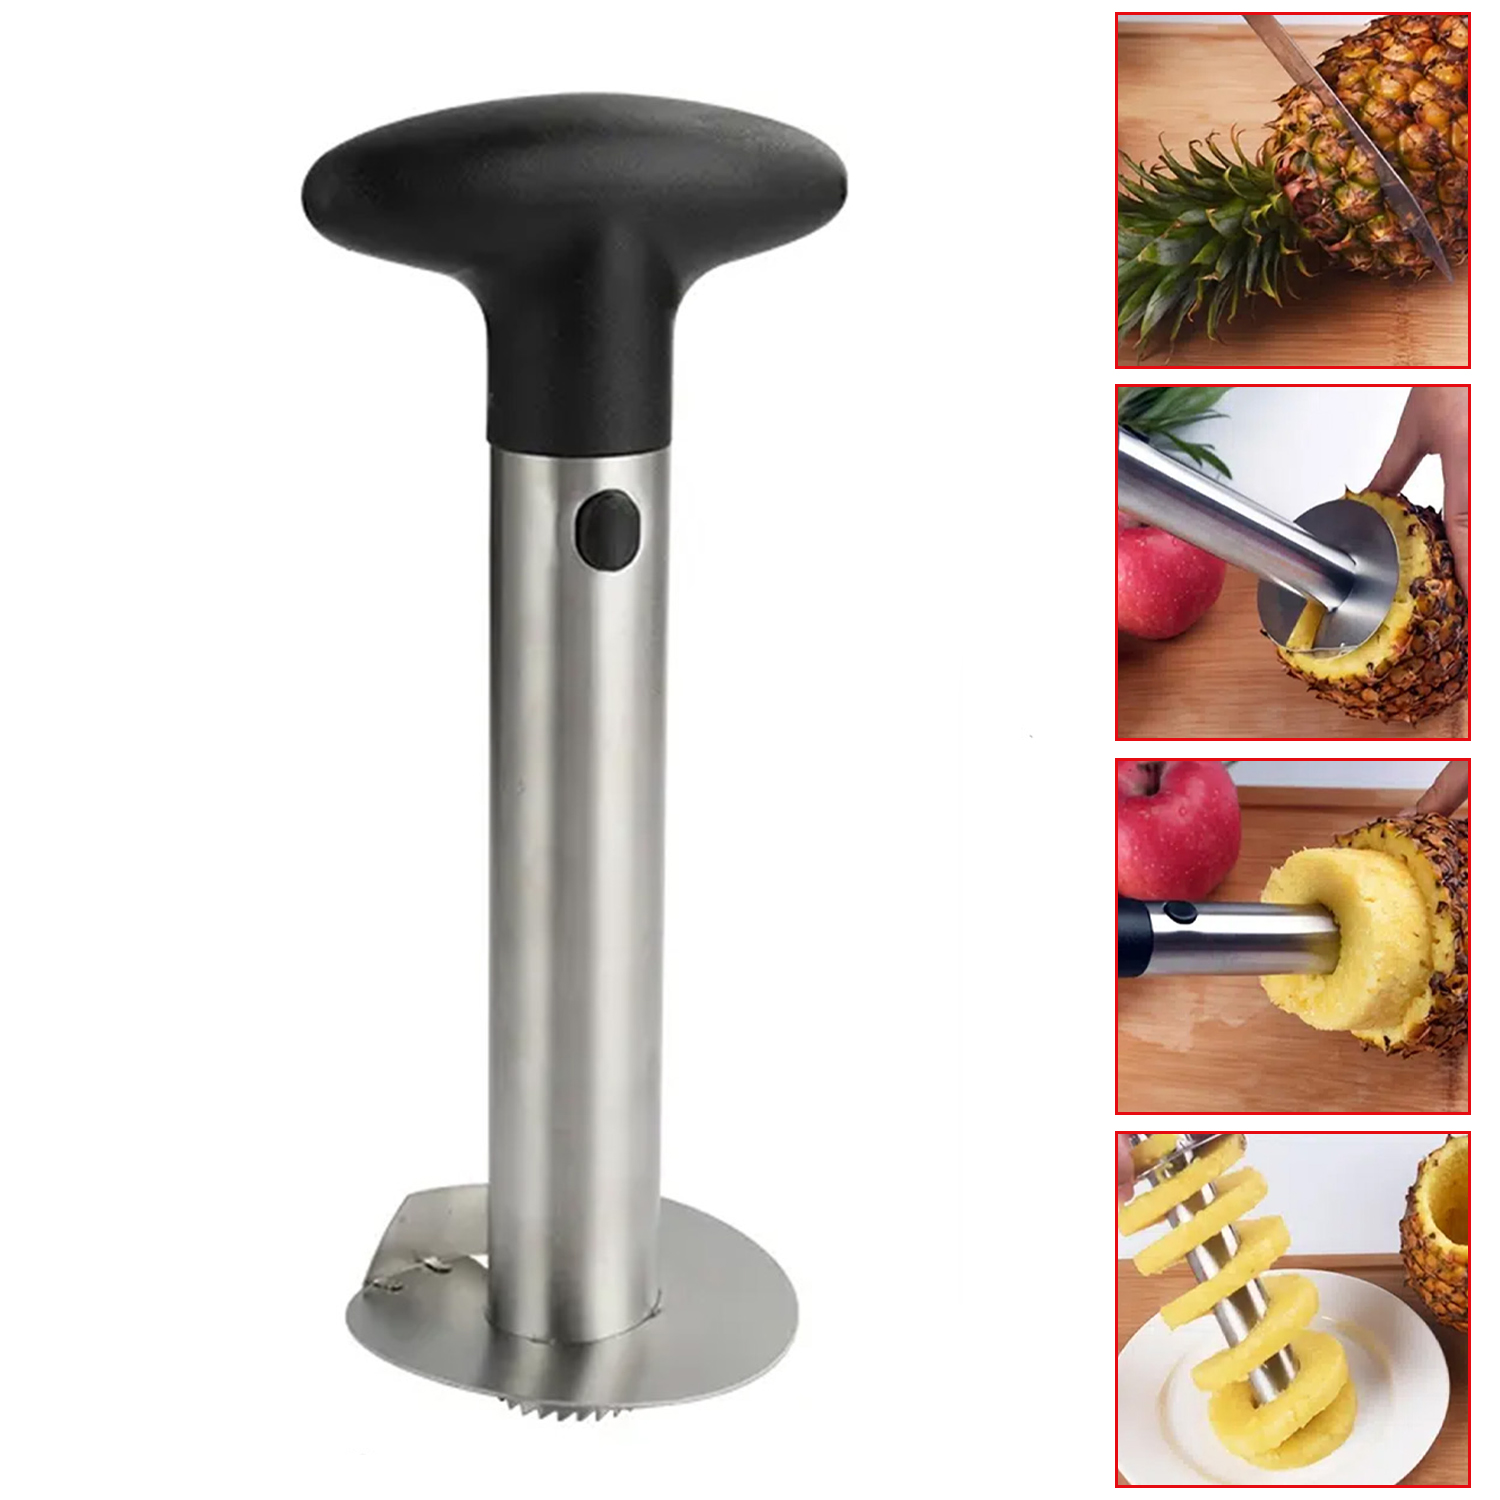 1 PCS Stainless Steel Pineapple Corer And Slicer Fruit Core Removal Tools Household Kitchen Gadget